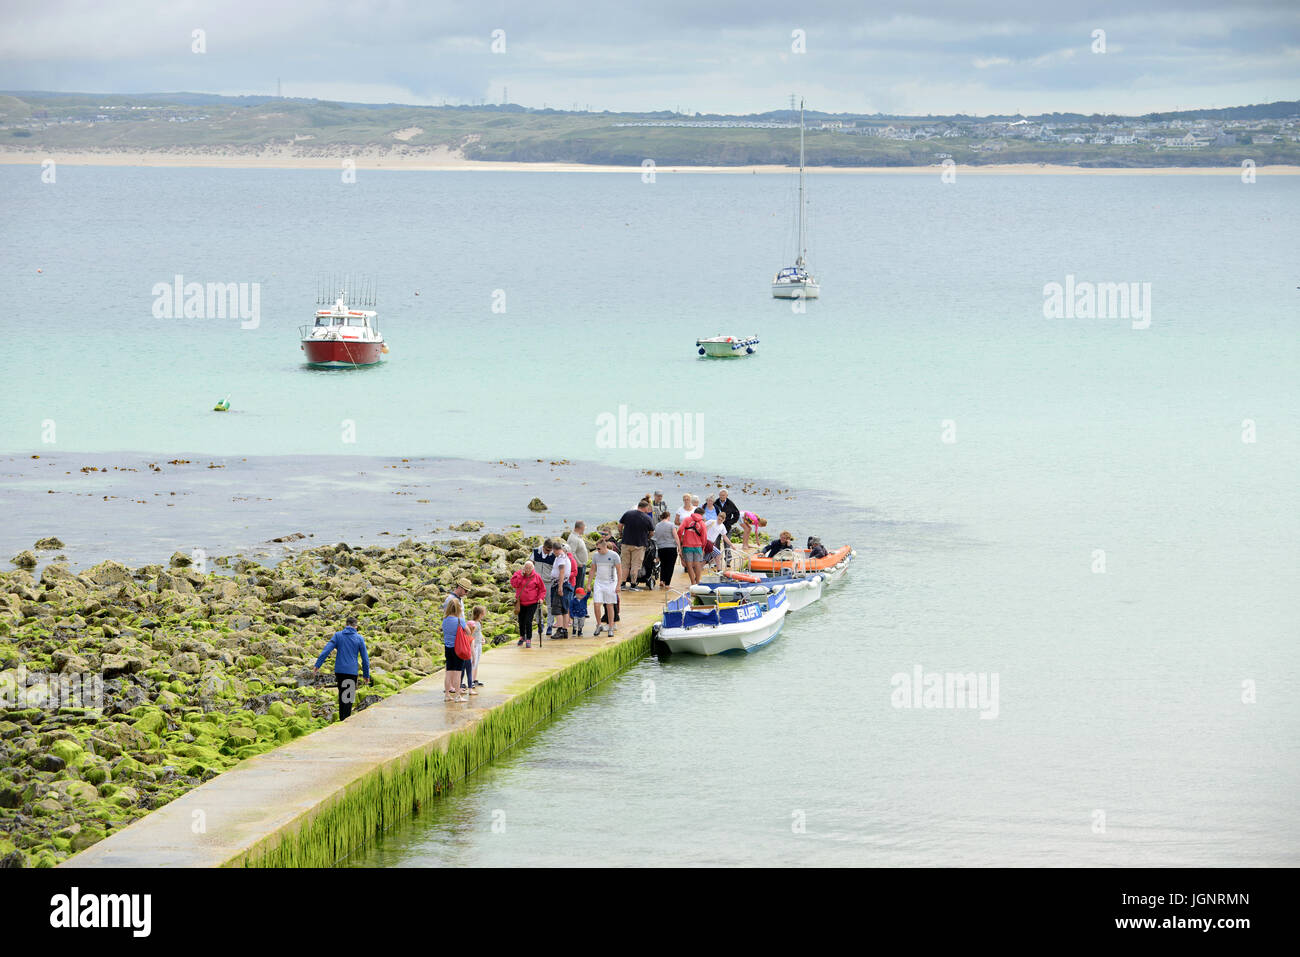 People standing on a jetty on the beach waiting for a boat trip in St Ives, Cornwall, England. Stock Photo